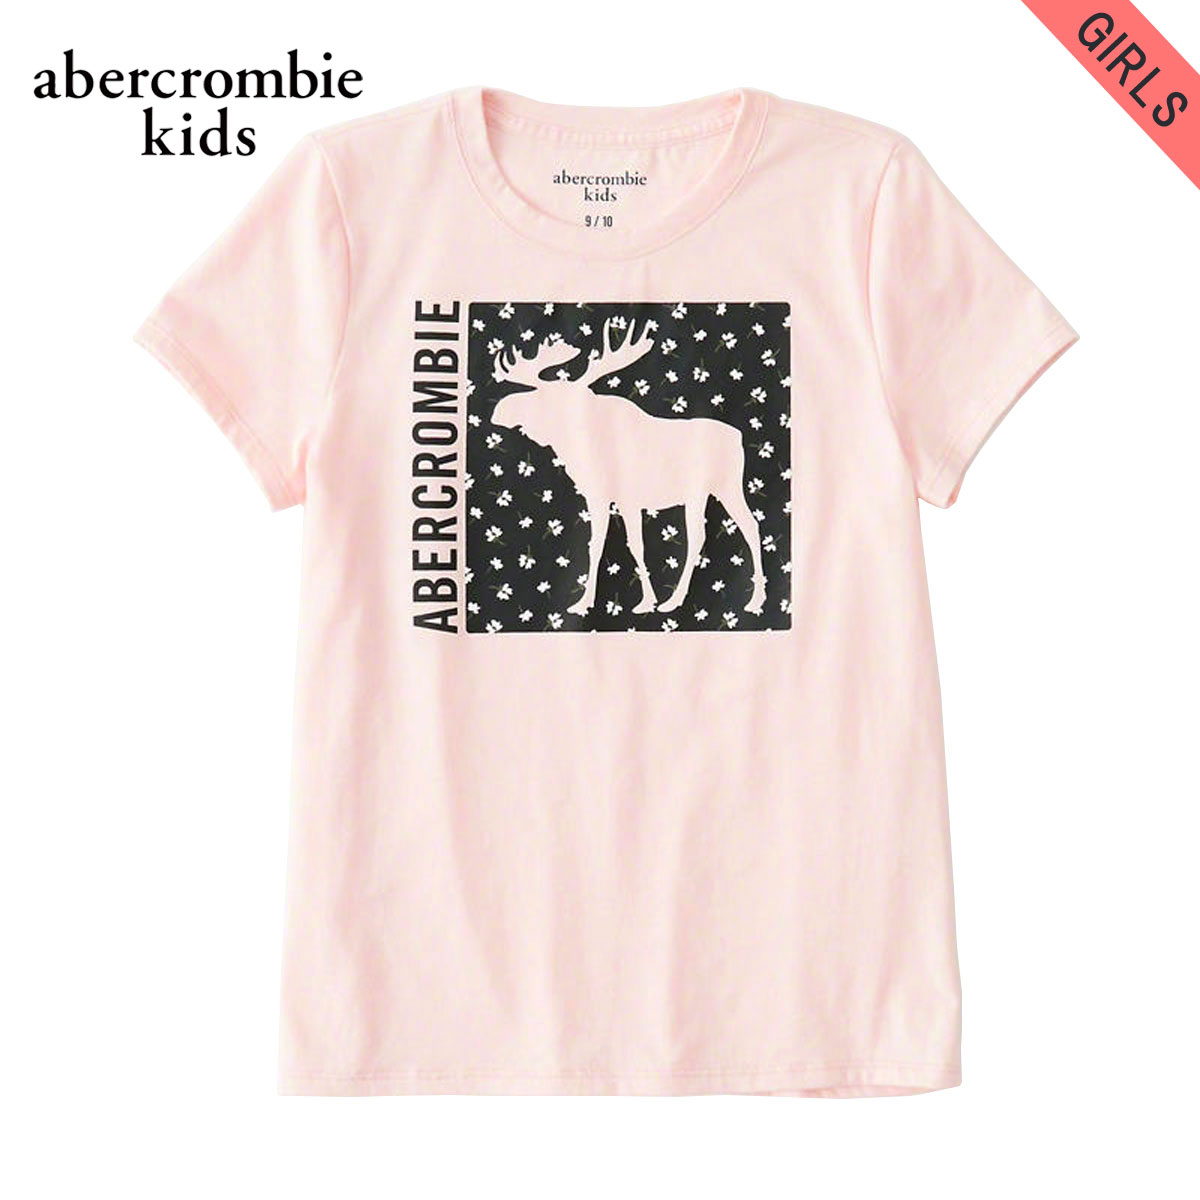 10%OFFクーポンセール 【利用期間 5/23 20:00～5/27 1:59】 アバクロキッズ Tシャツ 子供服 正規品 AbercrombieKids 半袖Tシャツ exploded icon tee 257-0891-0108-061